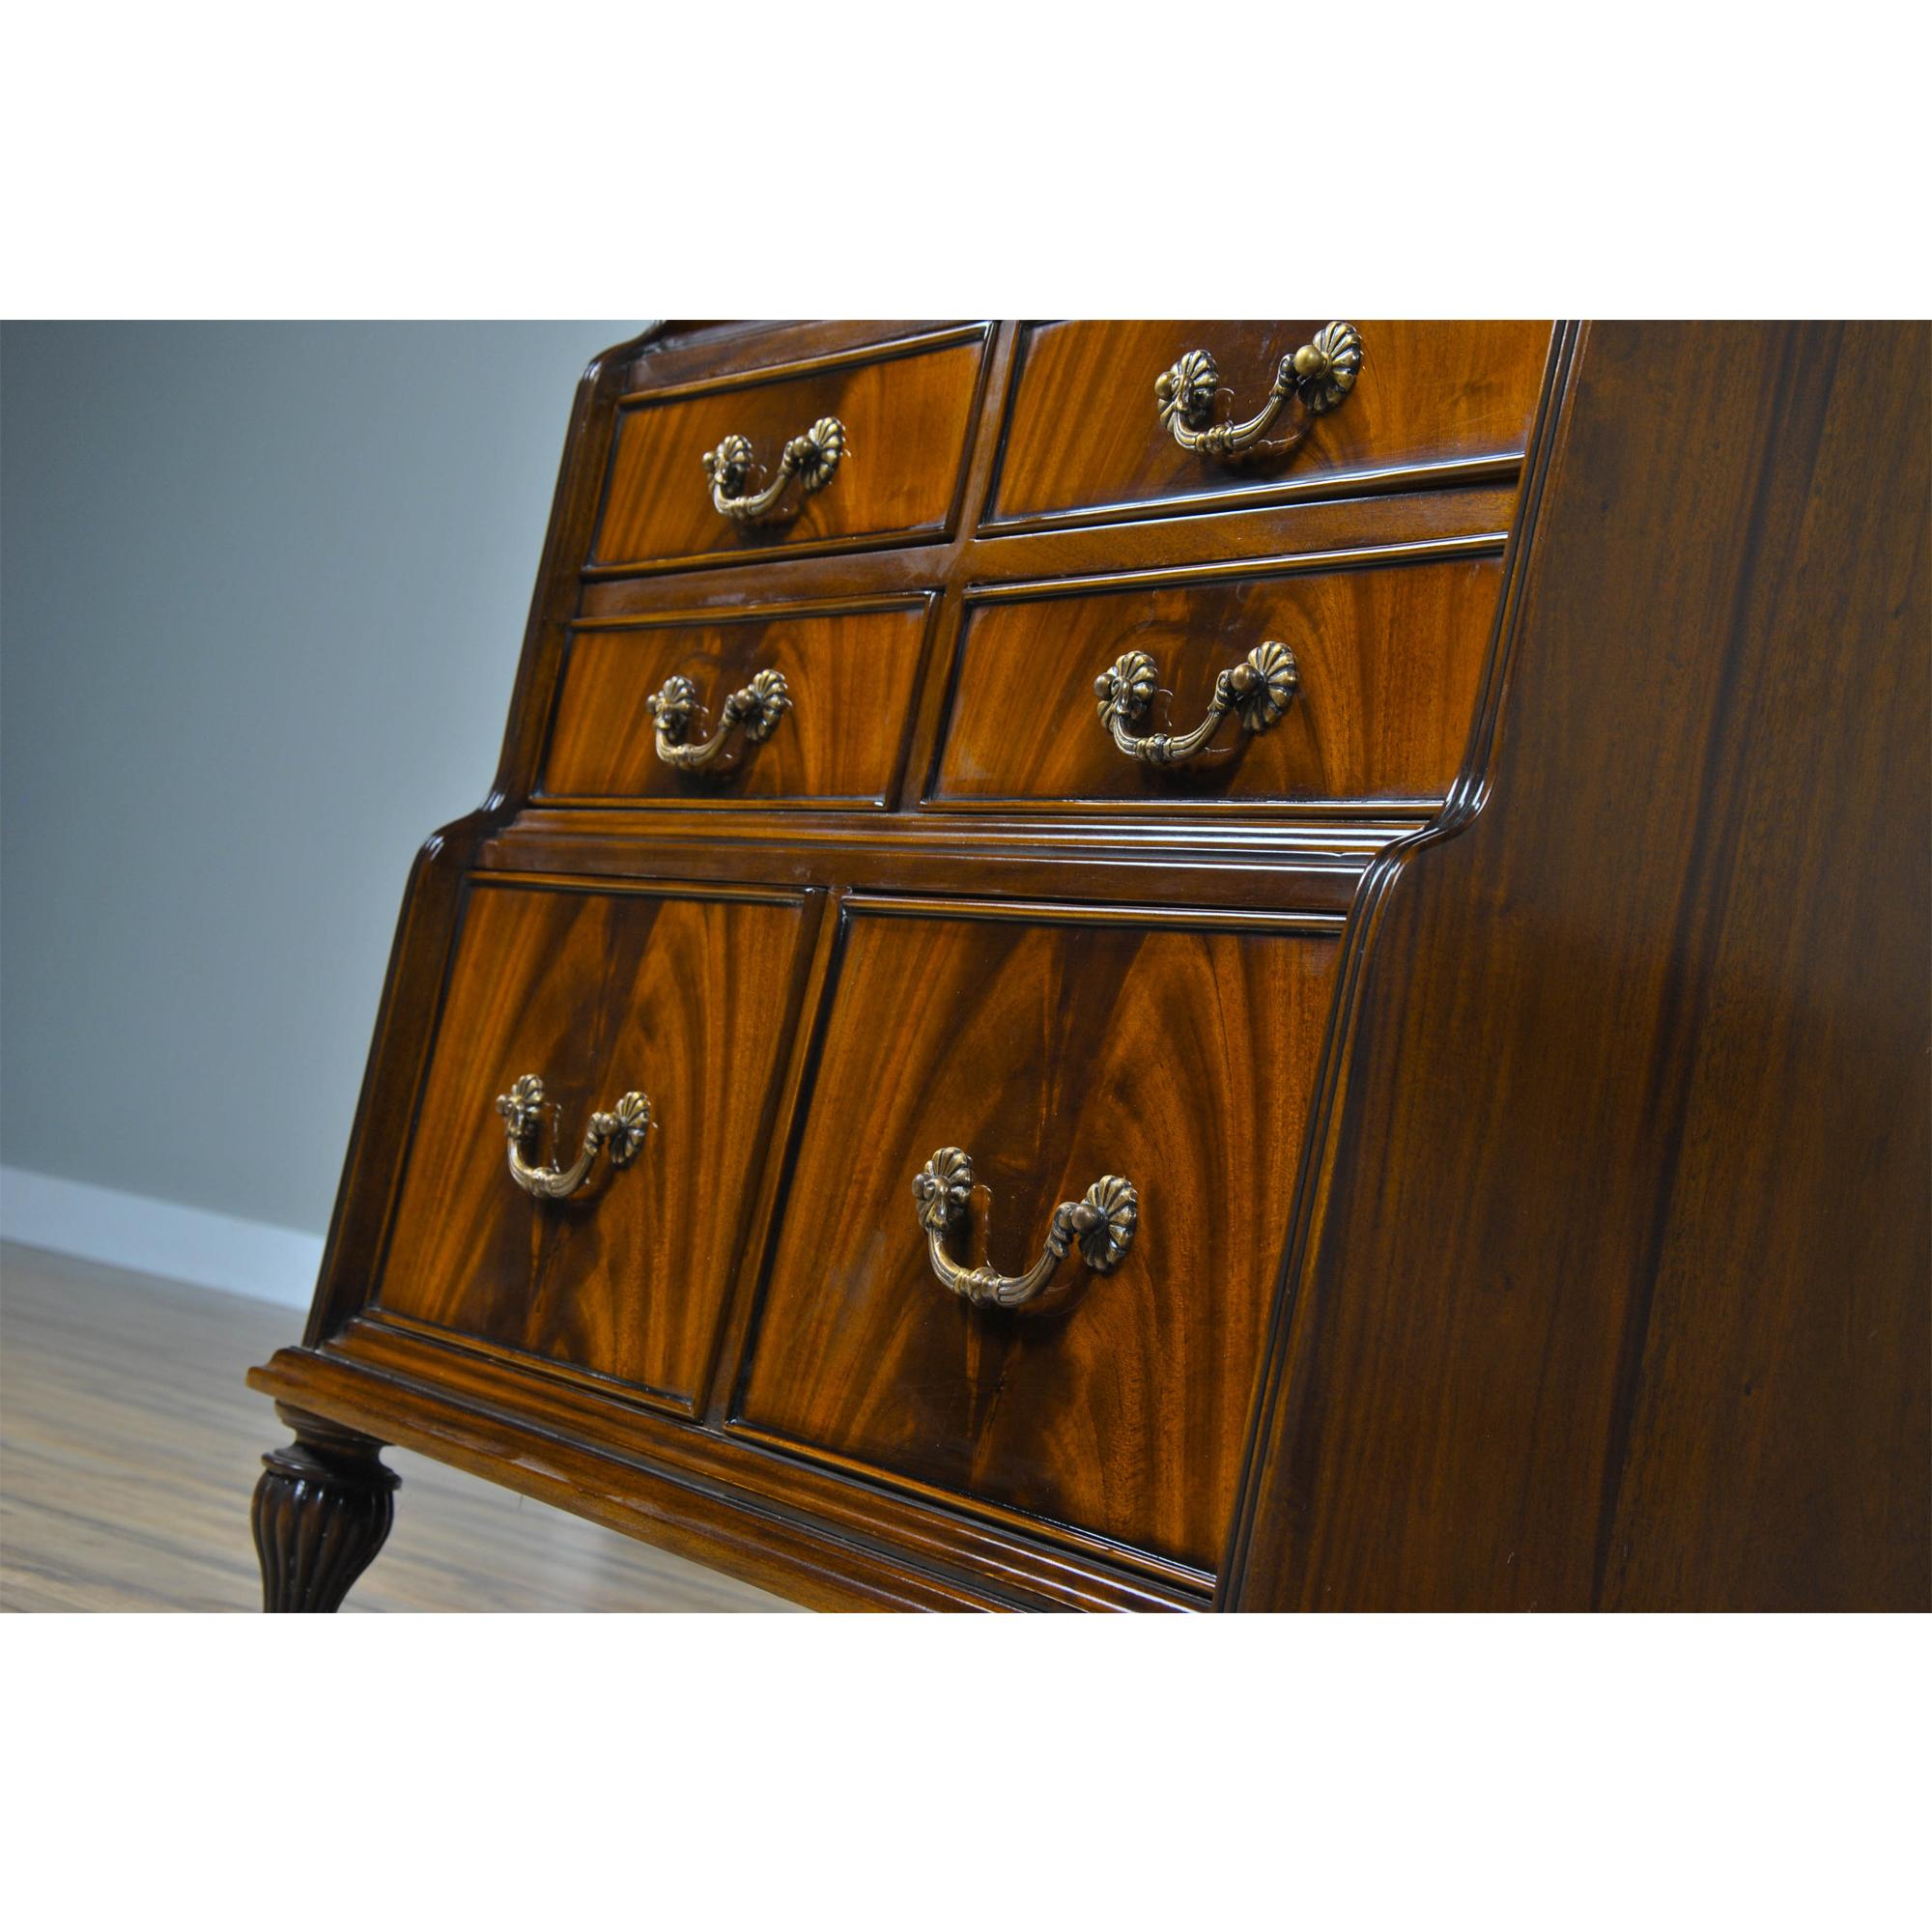 Waterfall Mahogany Bookcase In New Condition For Sale In Annville, PA